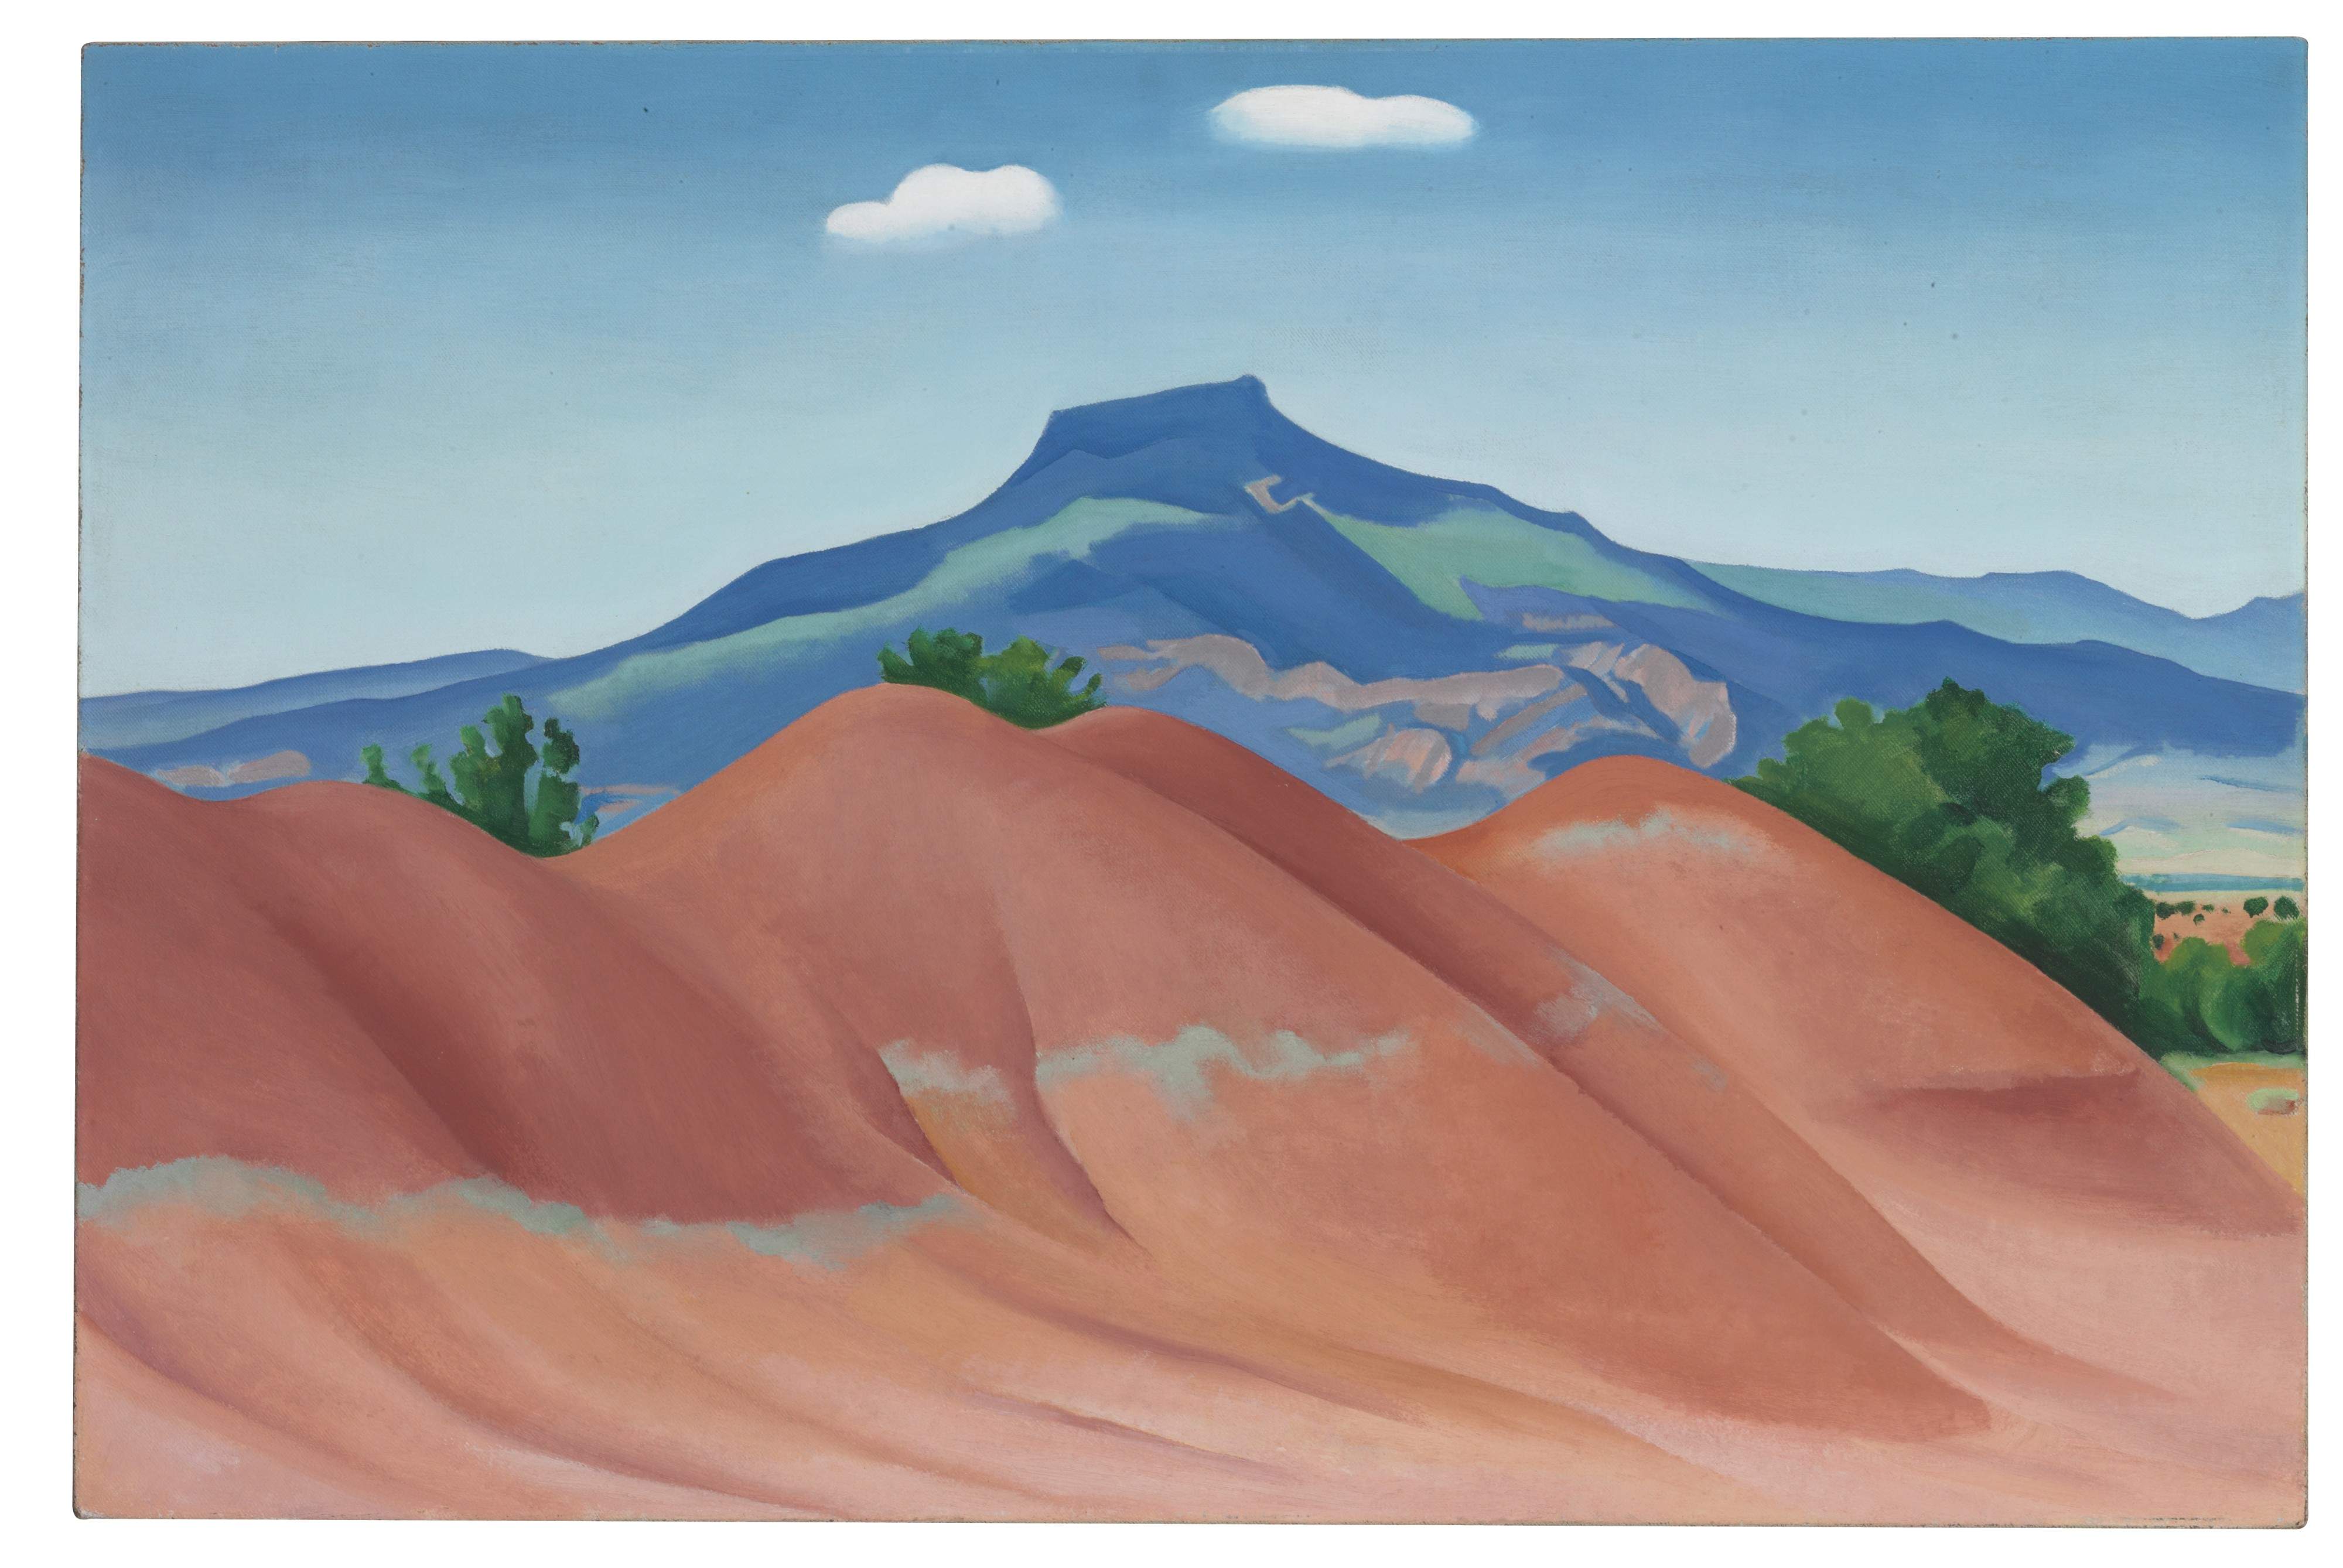 Georgia O'Keeffe (1887-1986), “Red Hills with Pedernal, White Clouds,”<br>oil on canvas, brought $ 4,533,000.<br>© 2016 Georgia O'Keeffe Museum / Artists Rights Society (ARS), New York